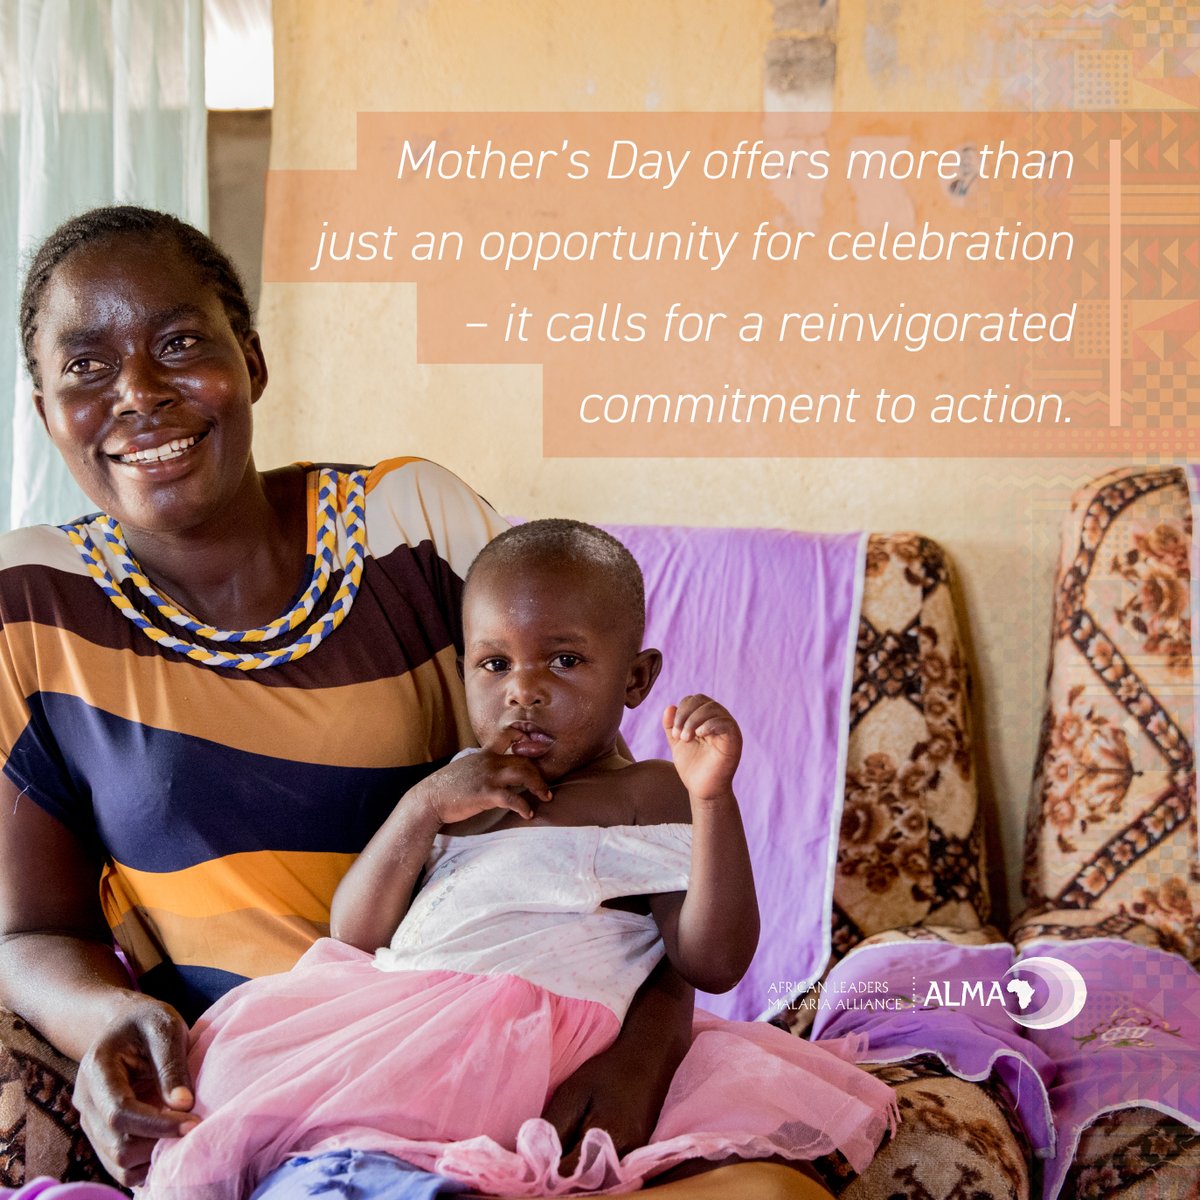 In our #MothersDay Statement, we look at the challenges threatening the mother-child relationship. This #MothersDay is a call to action for us to not just celebrate, but also advocate. We each must do our part to ensure that the relationship between mother and child remains